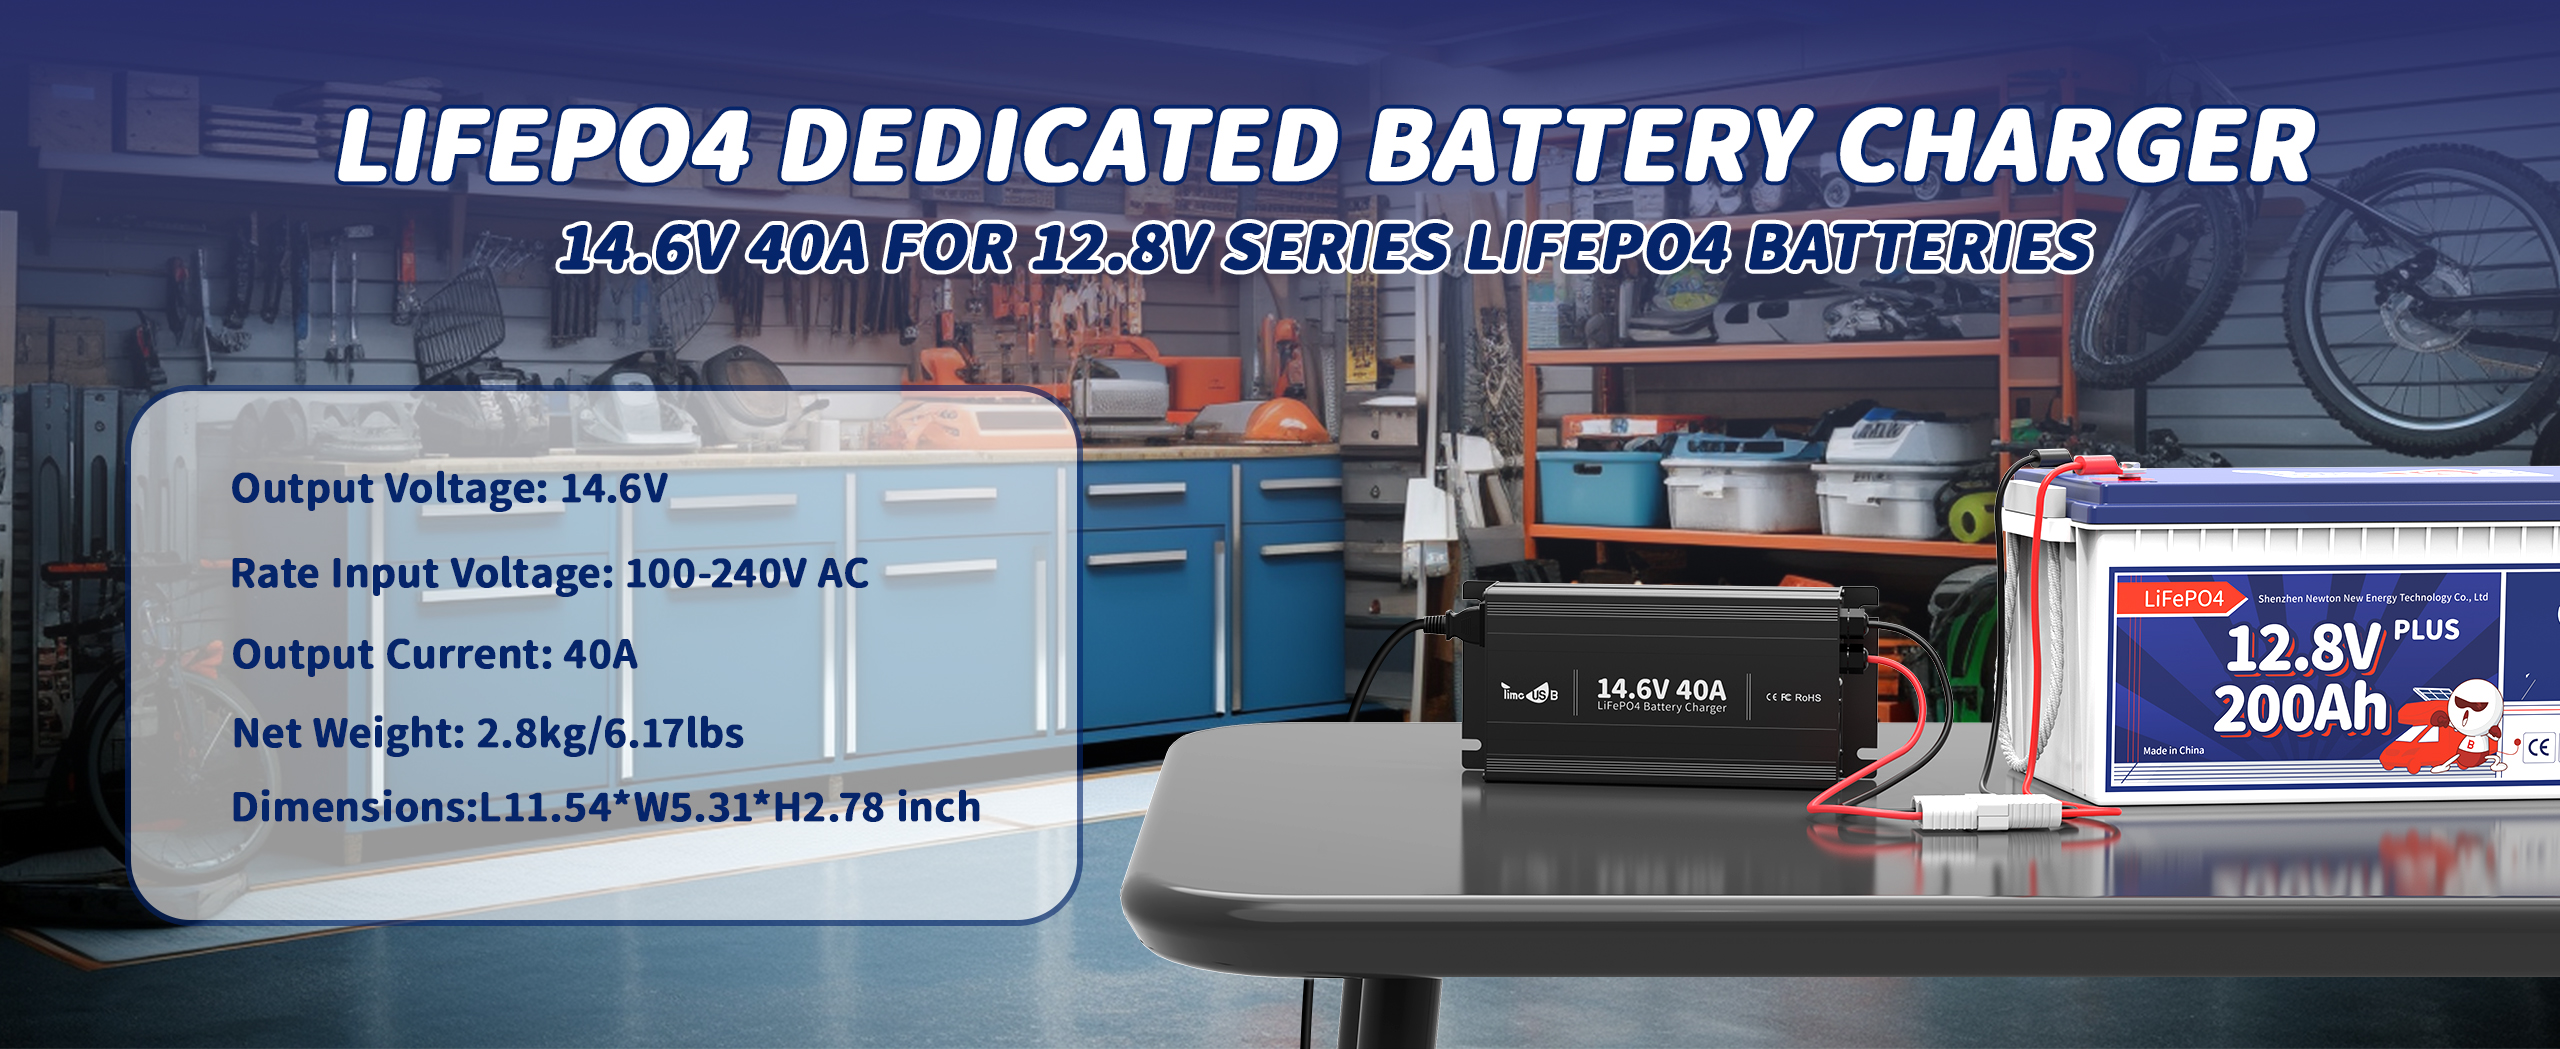 LiFePO4 dedicated battery charger with 12v lithium ion battery charger